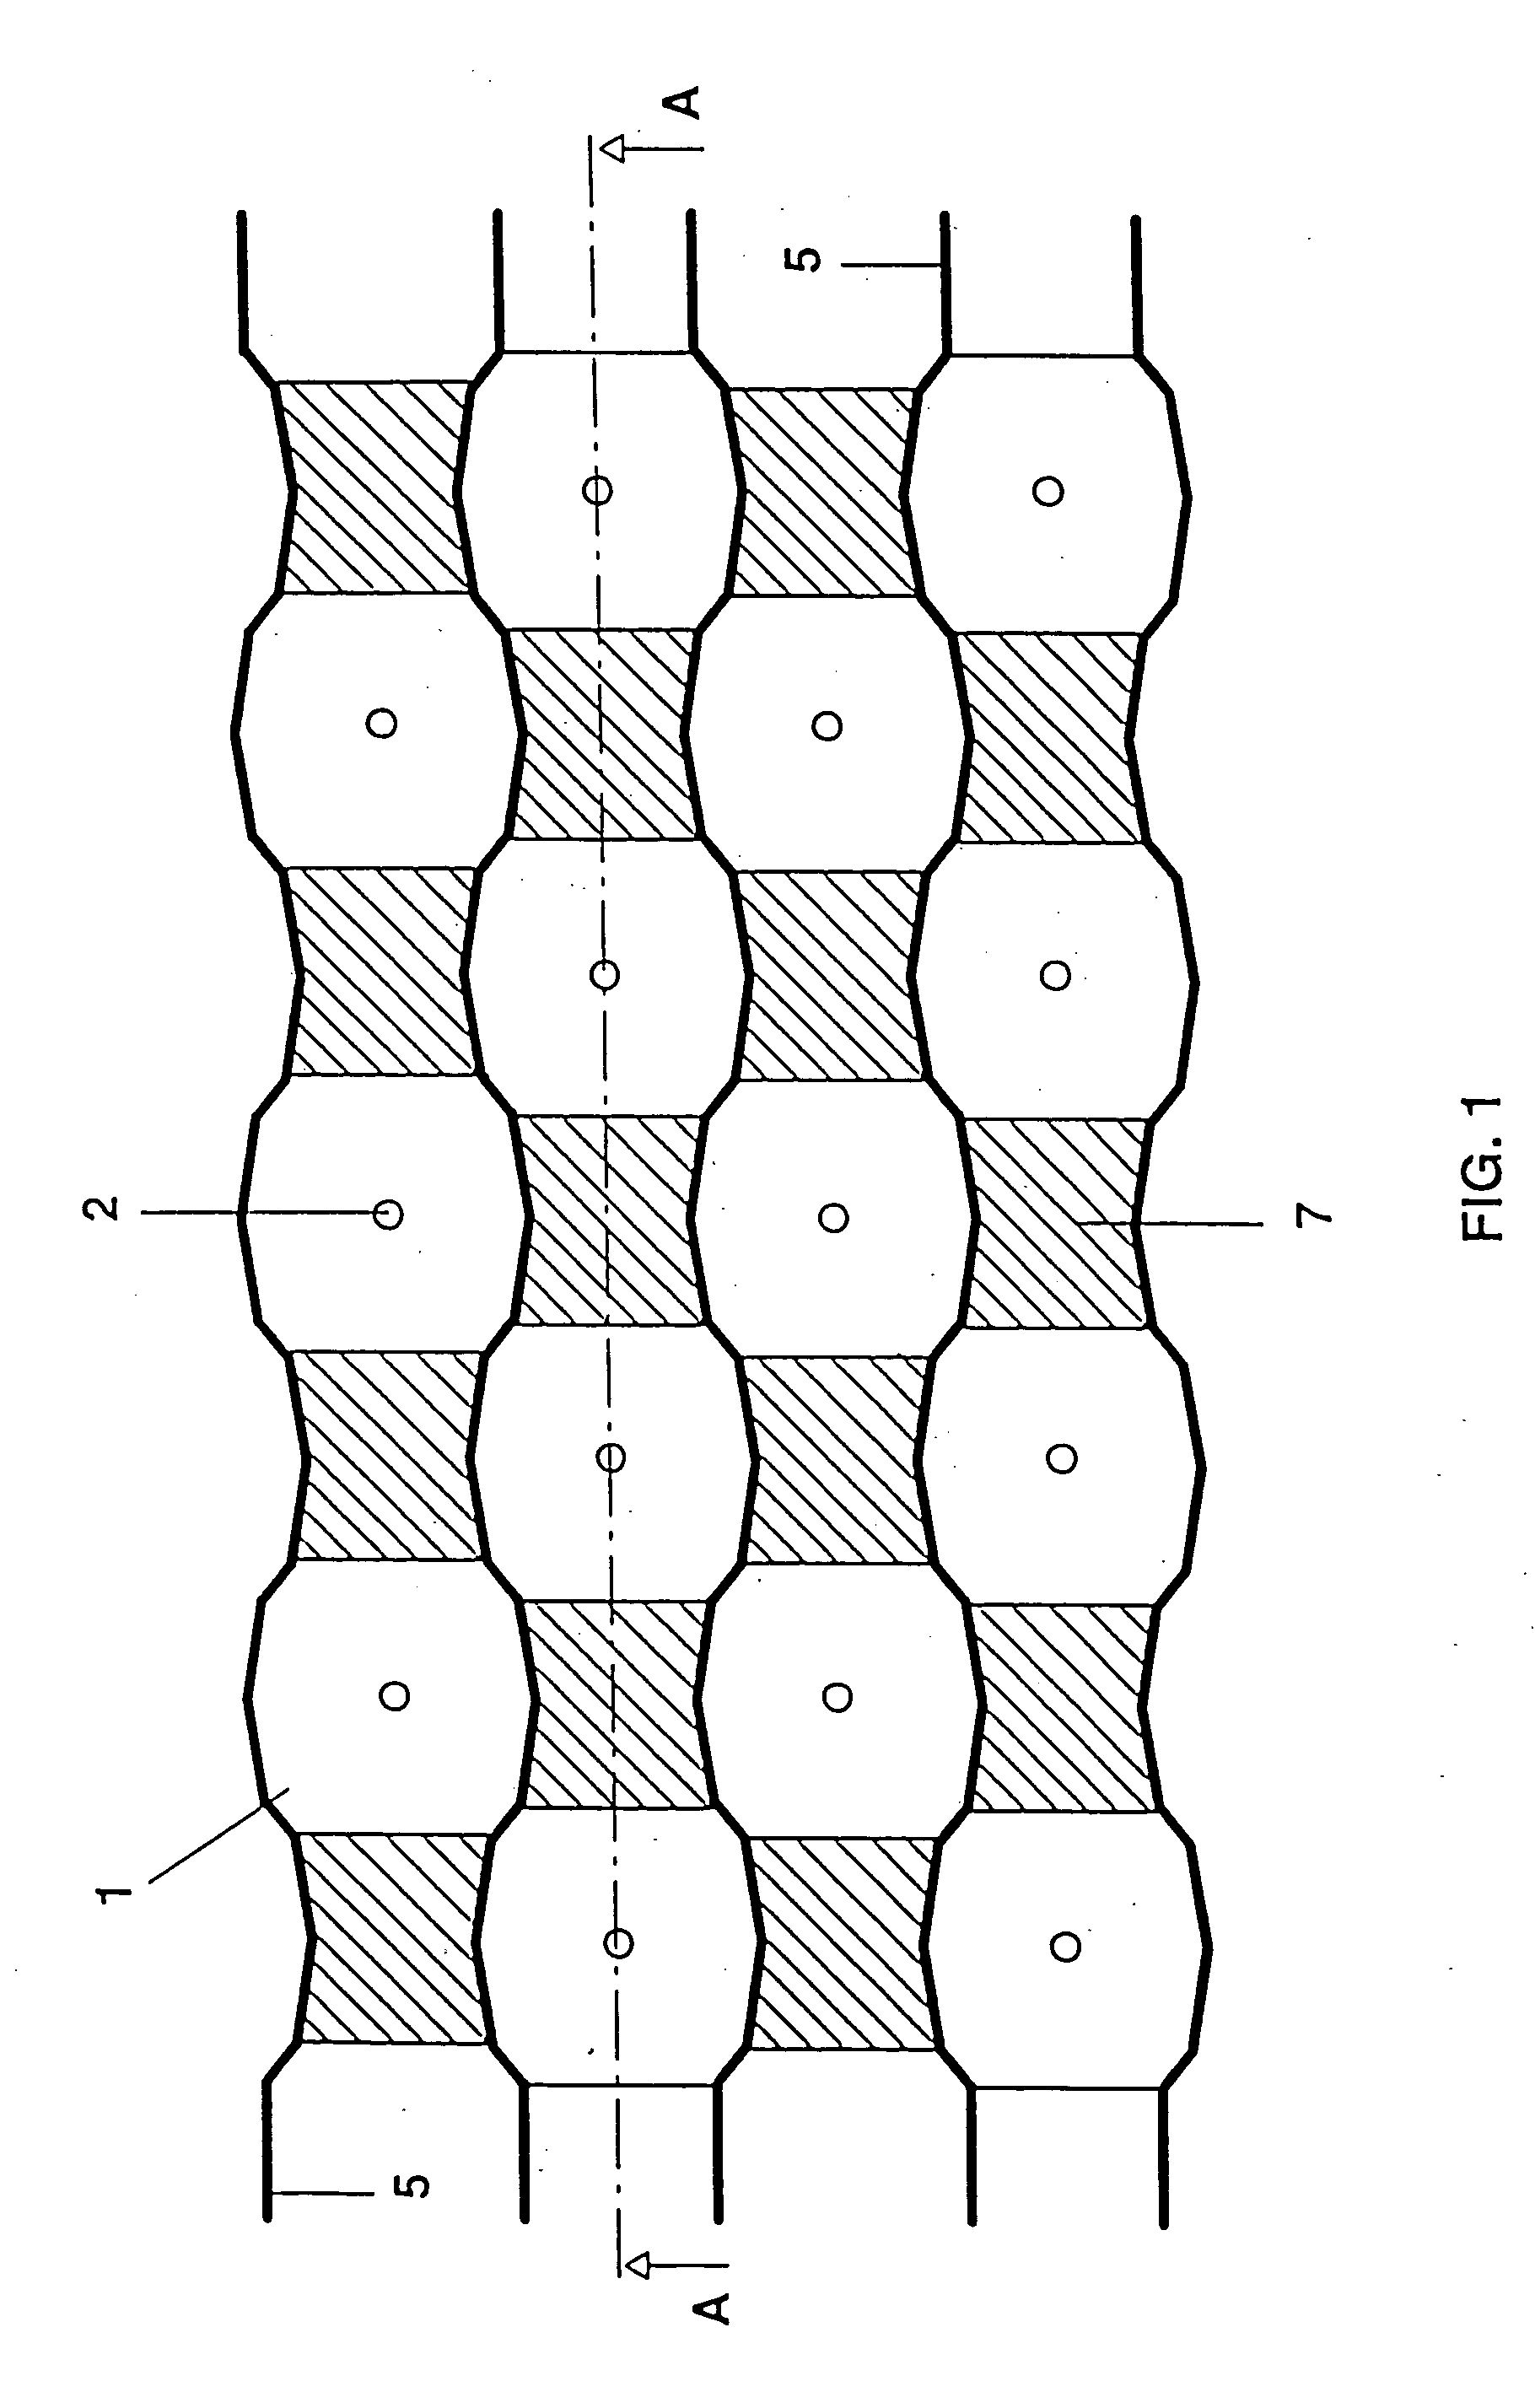 Discharge lamp for dielectrically impeded discharges having a corrugated cover plate structure